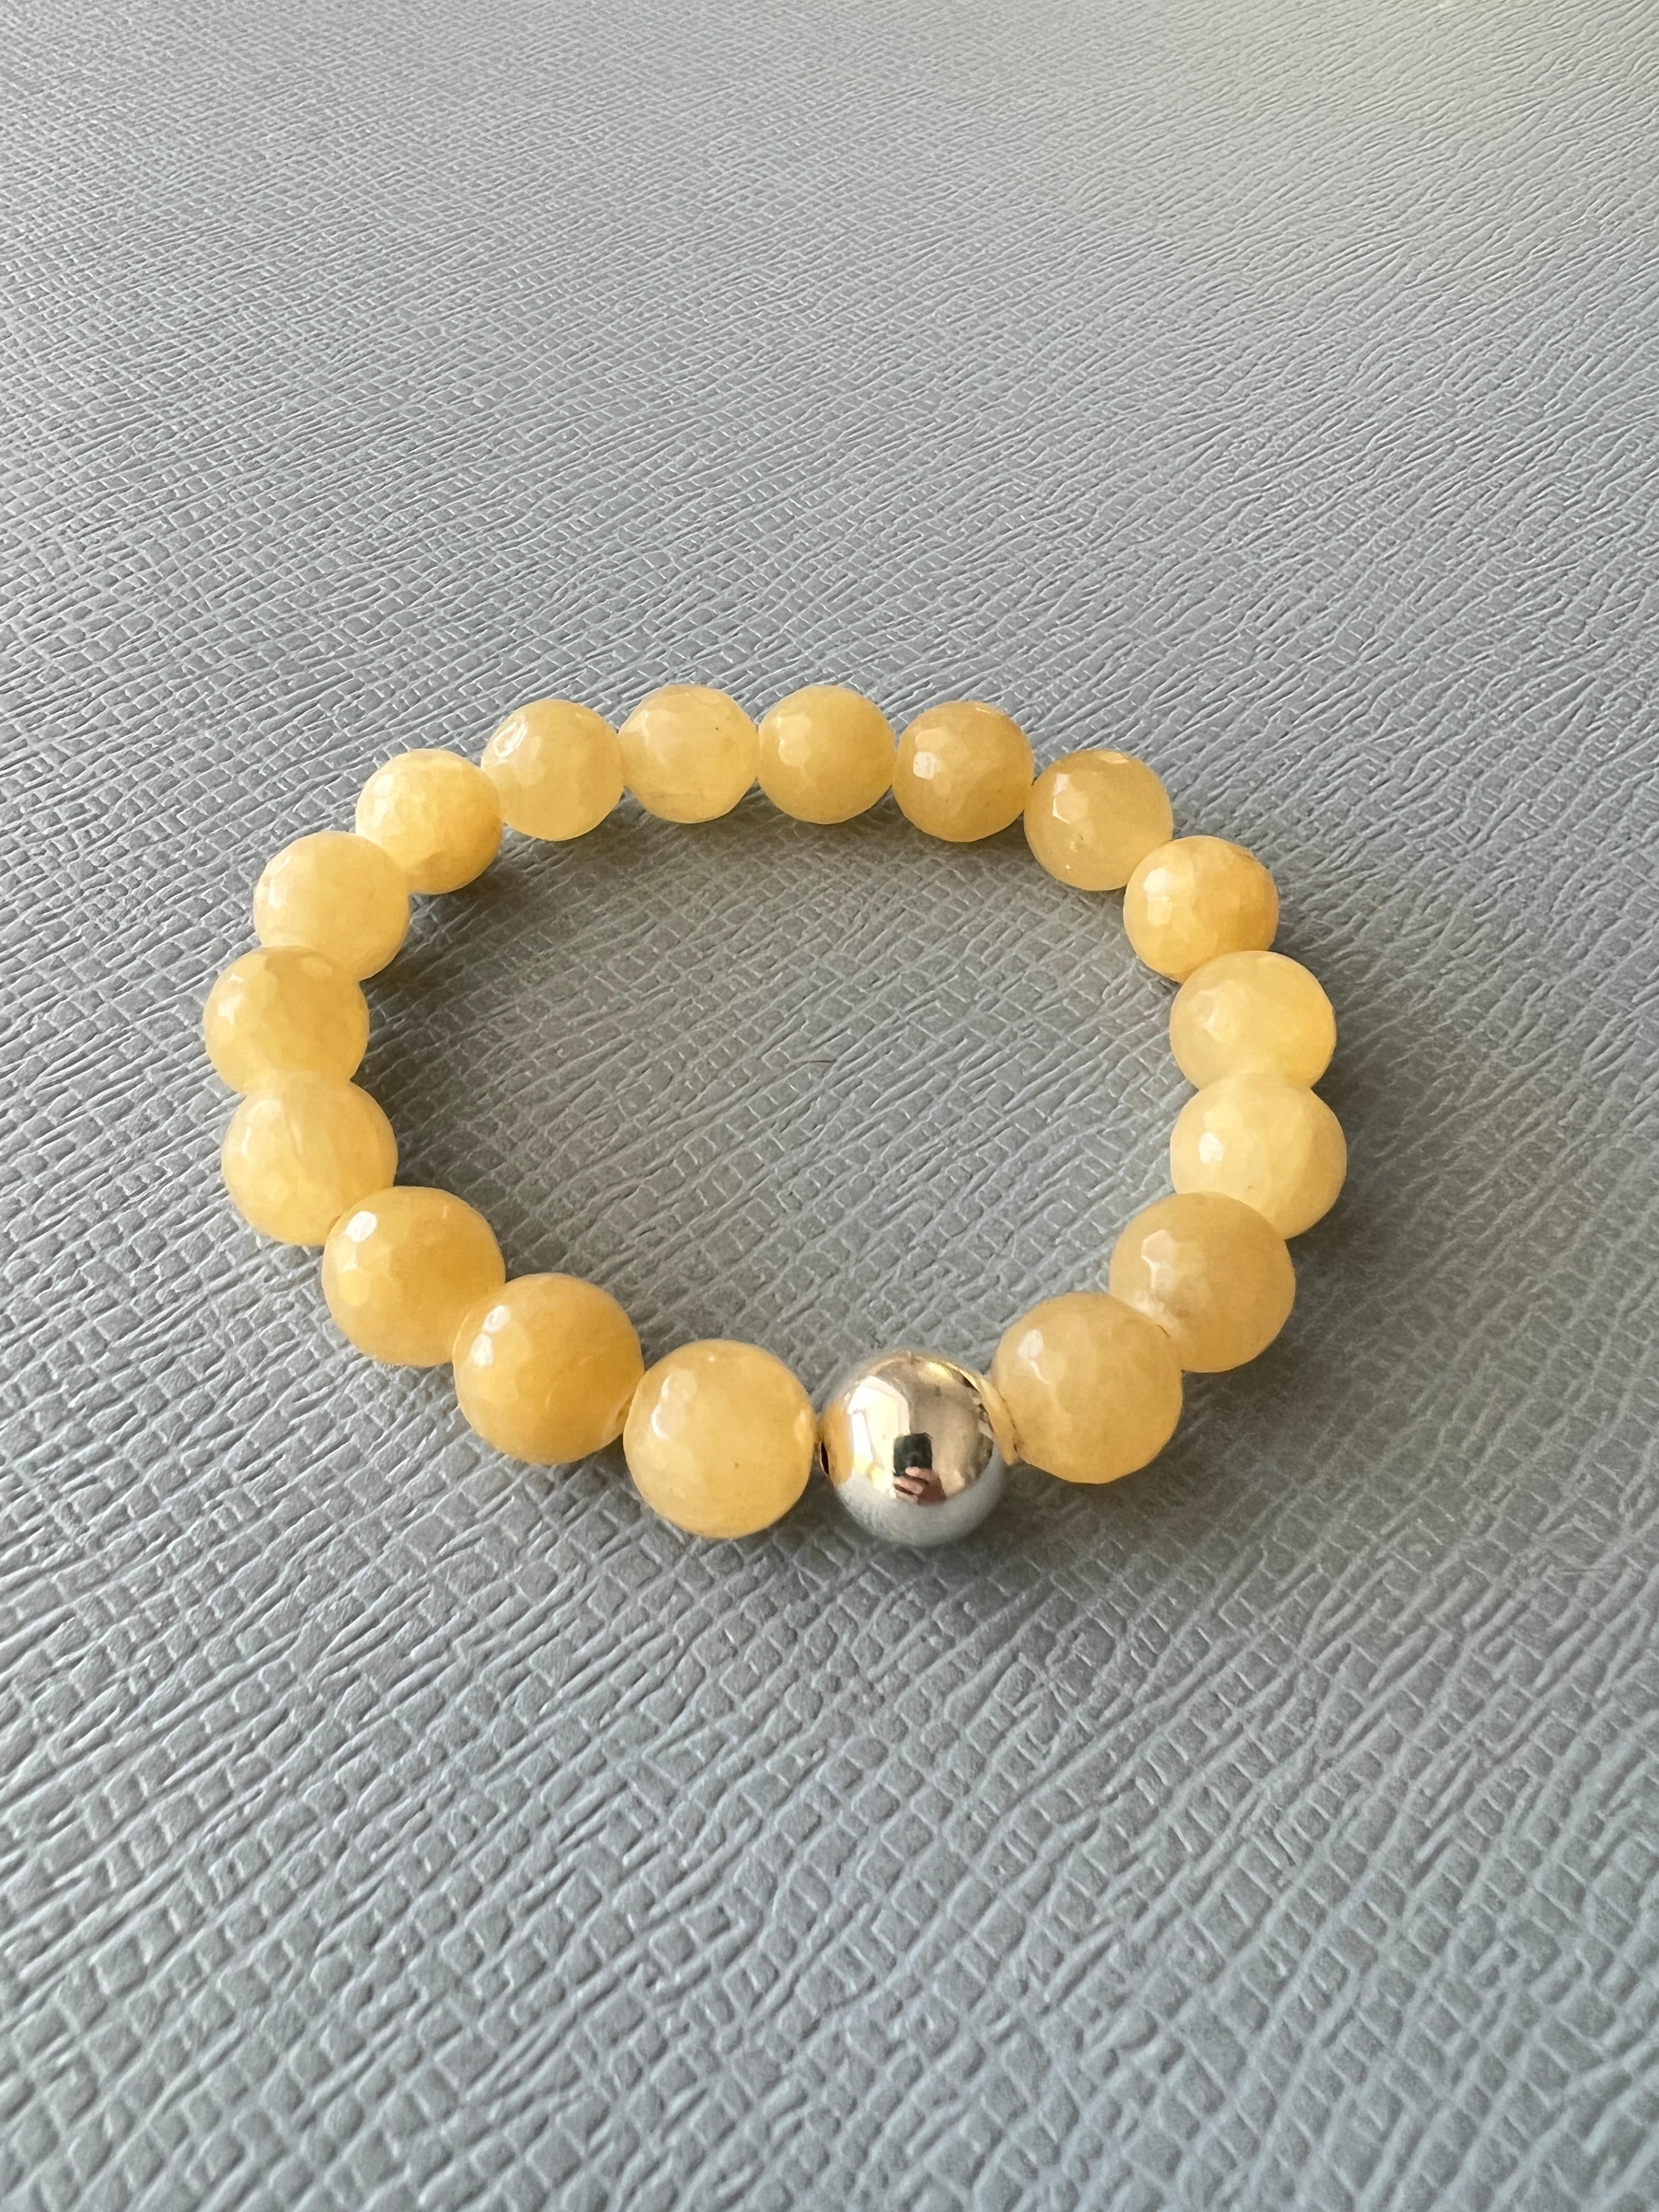 Yellow Calcite Round Facteted Bead Bracelet Silver J Dauphin For Sale 2